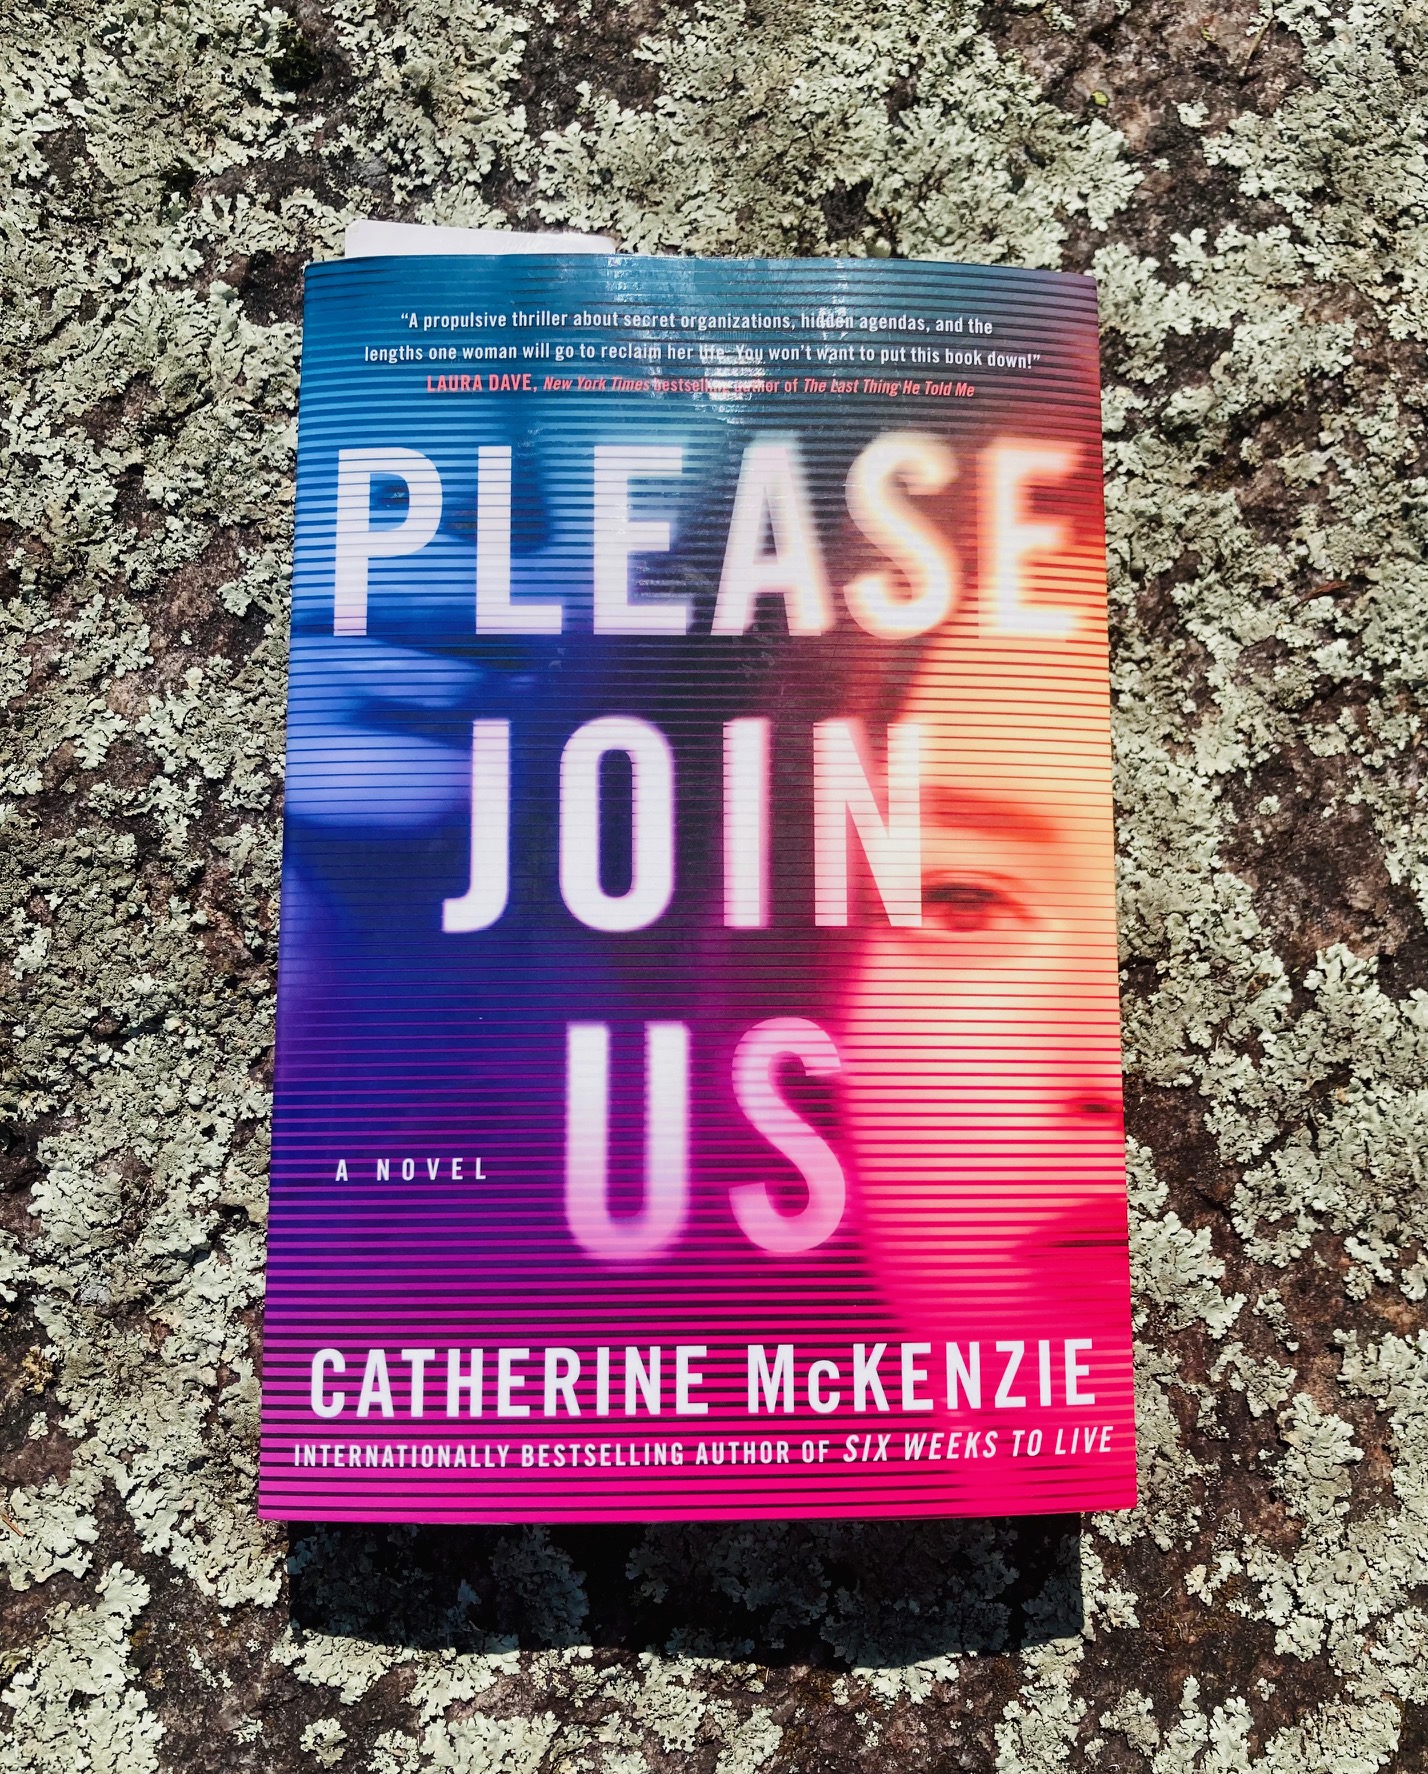 Please Join Us by Catherine McKenzie book pictured on a lichen covered rock